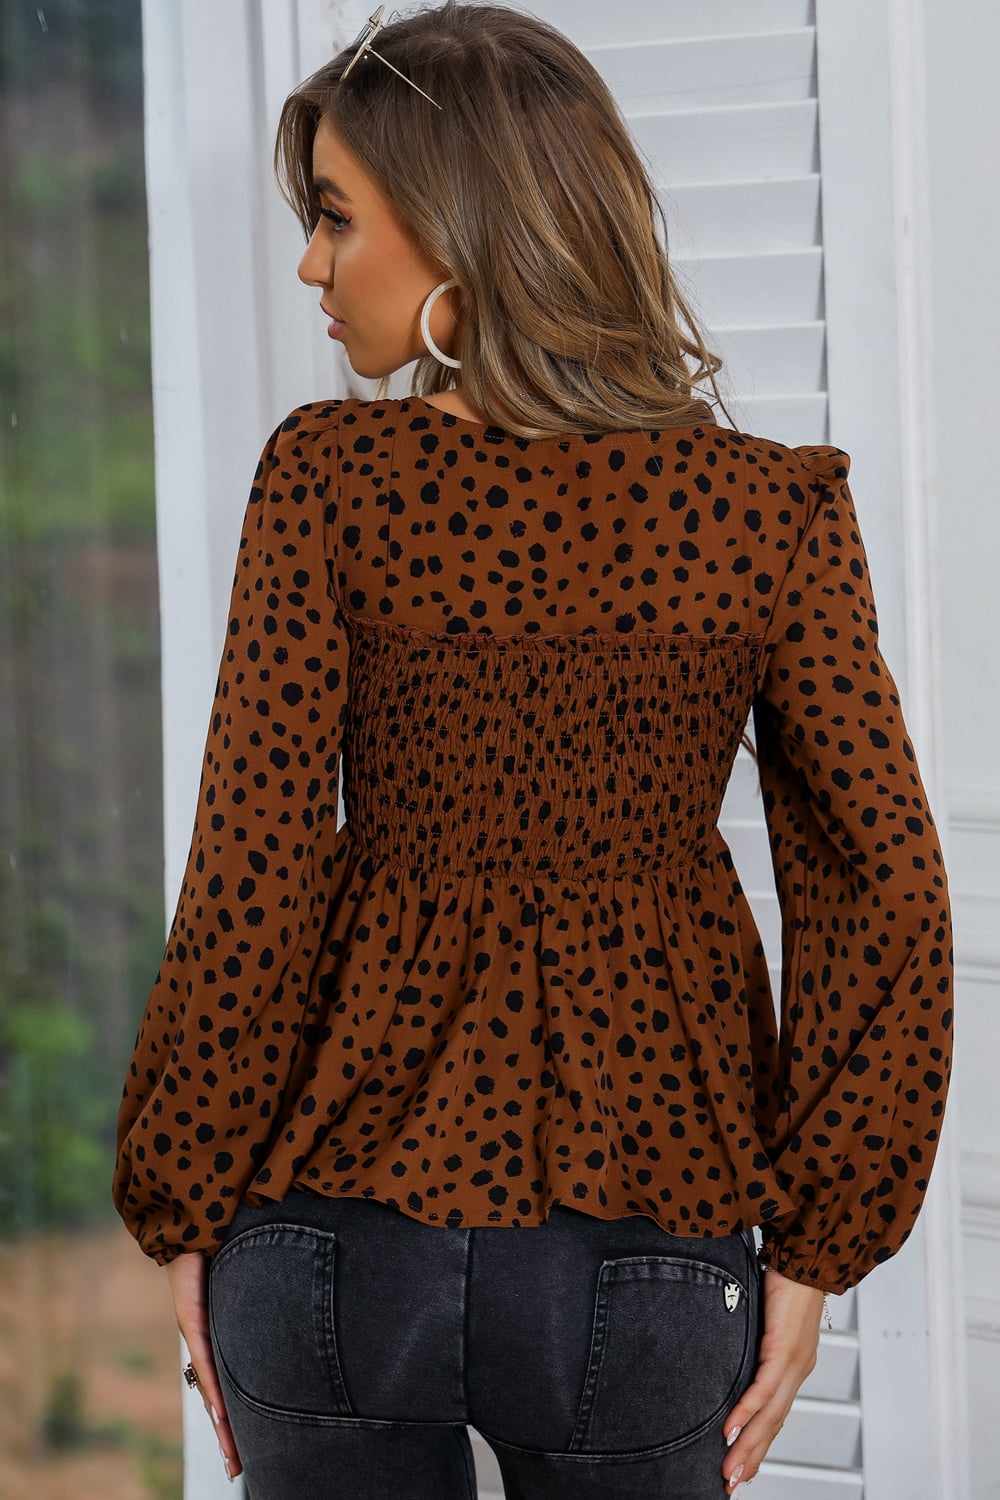 Square Neck Long Sleeve Smocked Blouse - Online Only